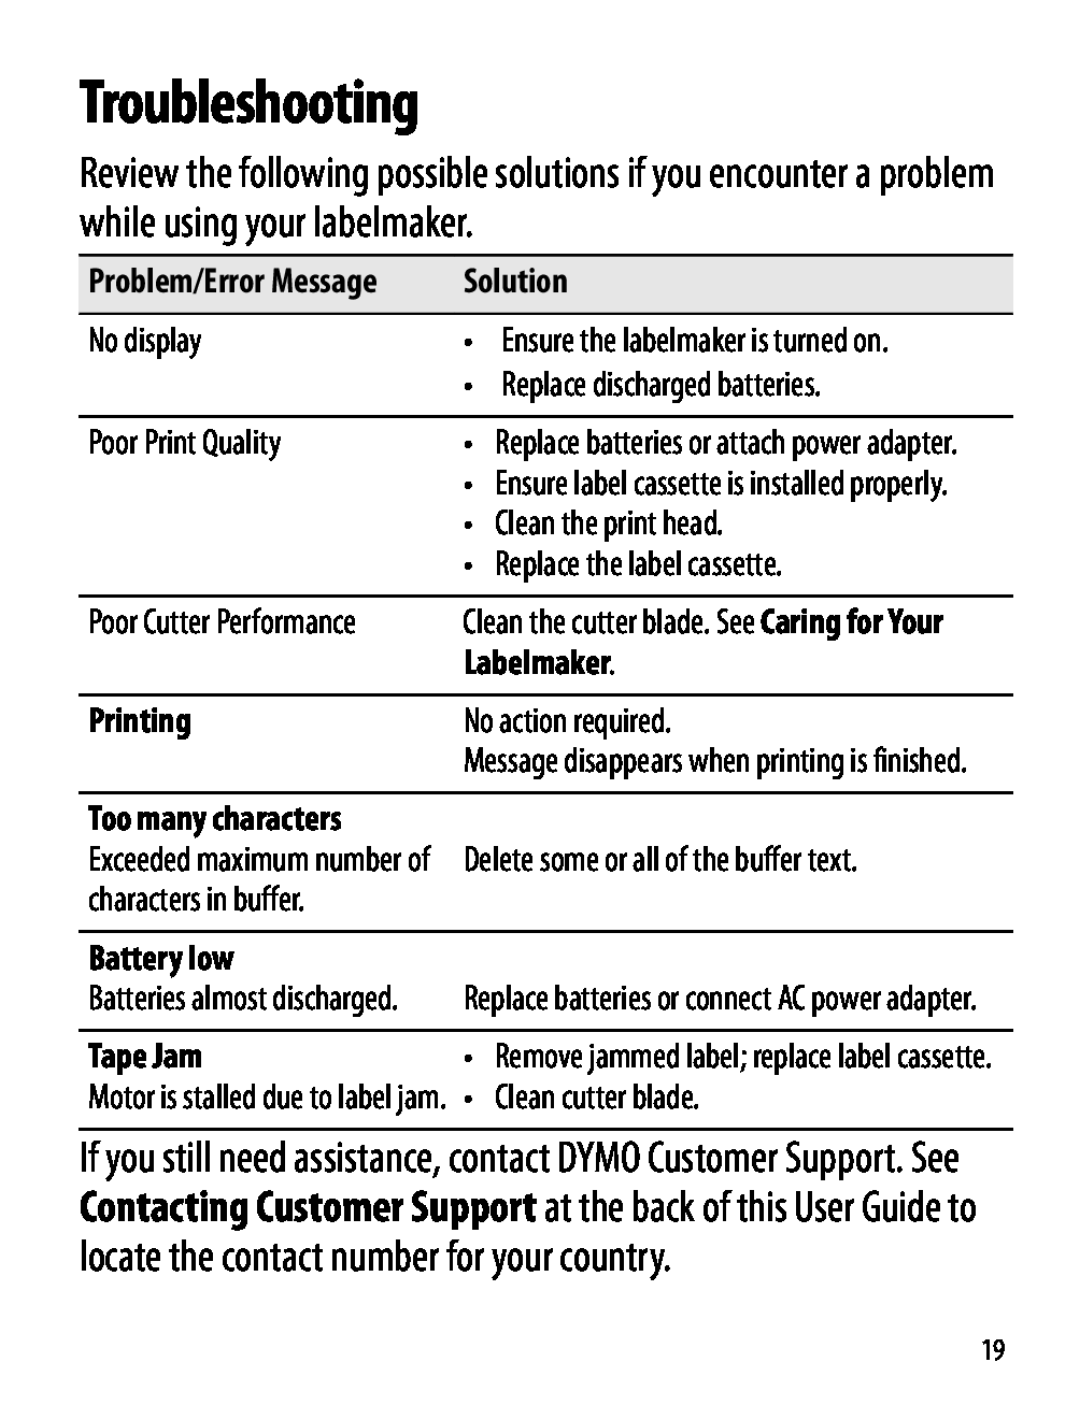 Dymo Labelmaker Troubleshooting, Solution, Printing, Battery low, Tape Jam, Too many characters, Problem/Error Message 